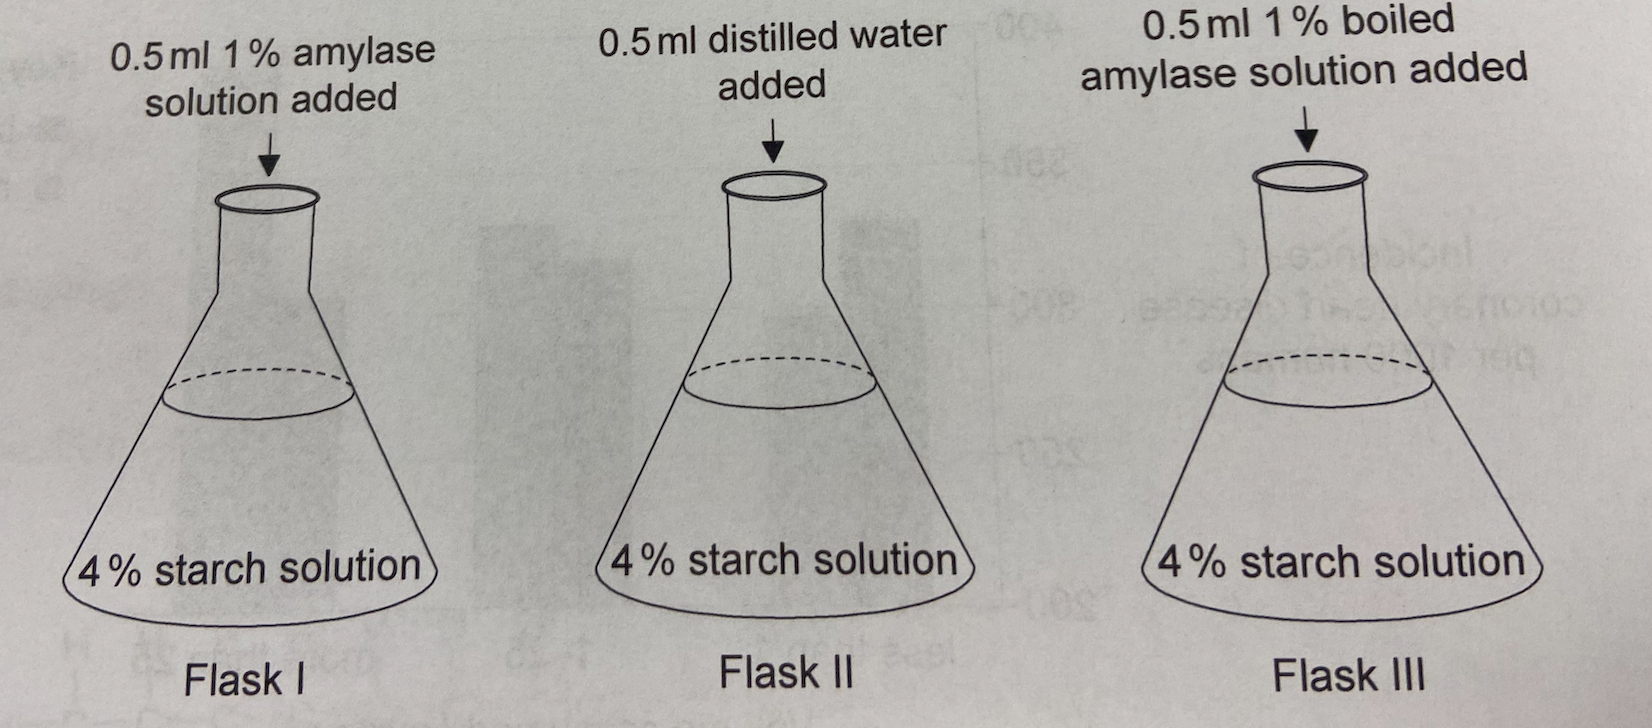 <p>Three flasks were prepared for an analsysi of the activity of amylase. At time zero, each of the substances indicated in the diagram was added.</p><p>Which flasks could provide support for the hypothesis that heat denatures enzymes?</p>